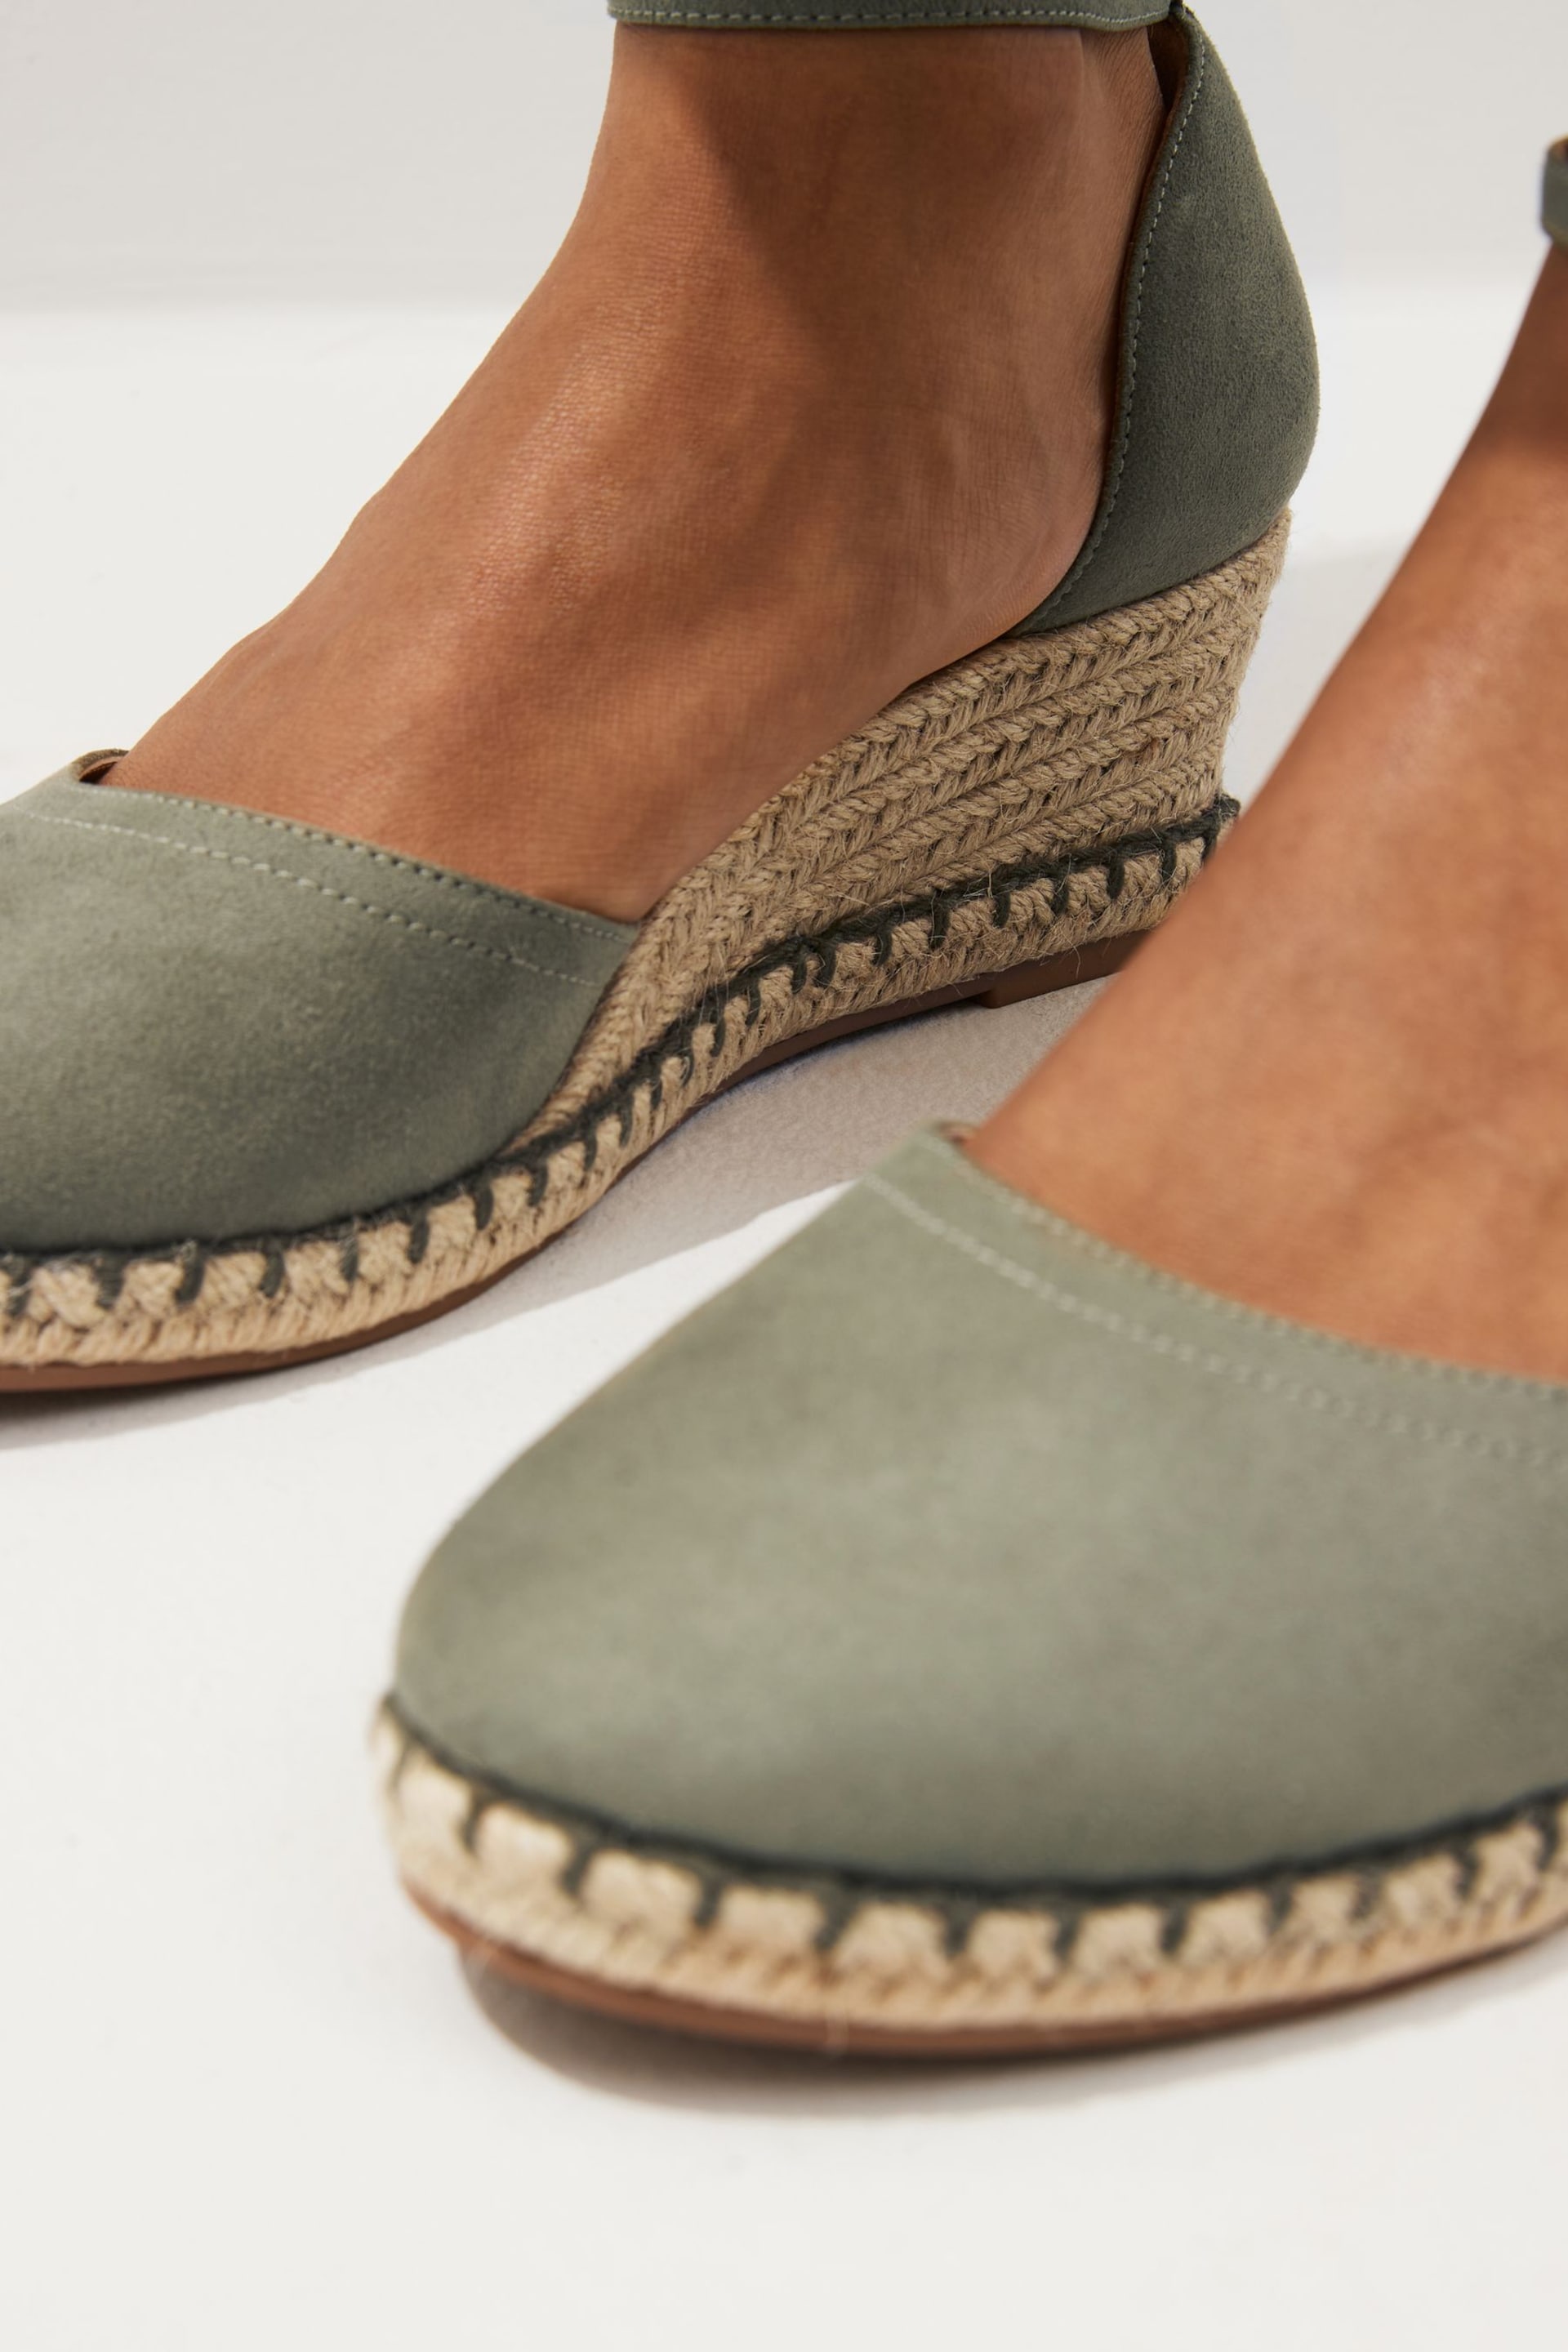 Green Regular/Wide Fit Forever Comfort® Closed Toe Wedges - Image 2 of 9